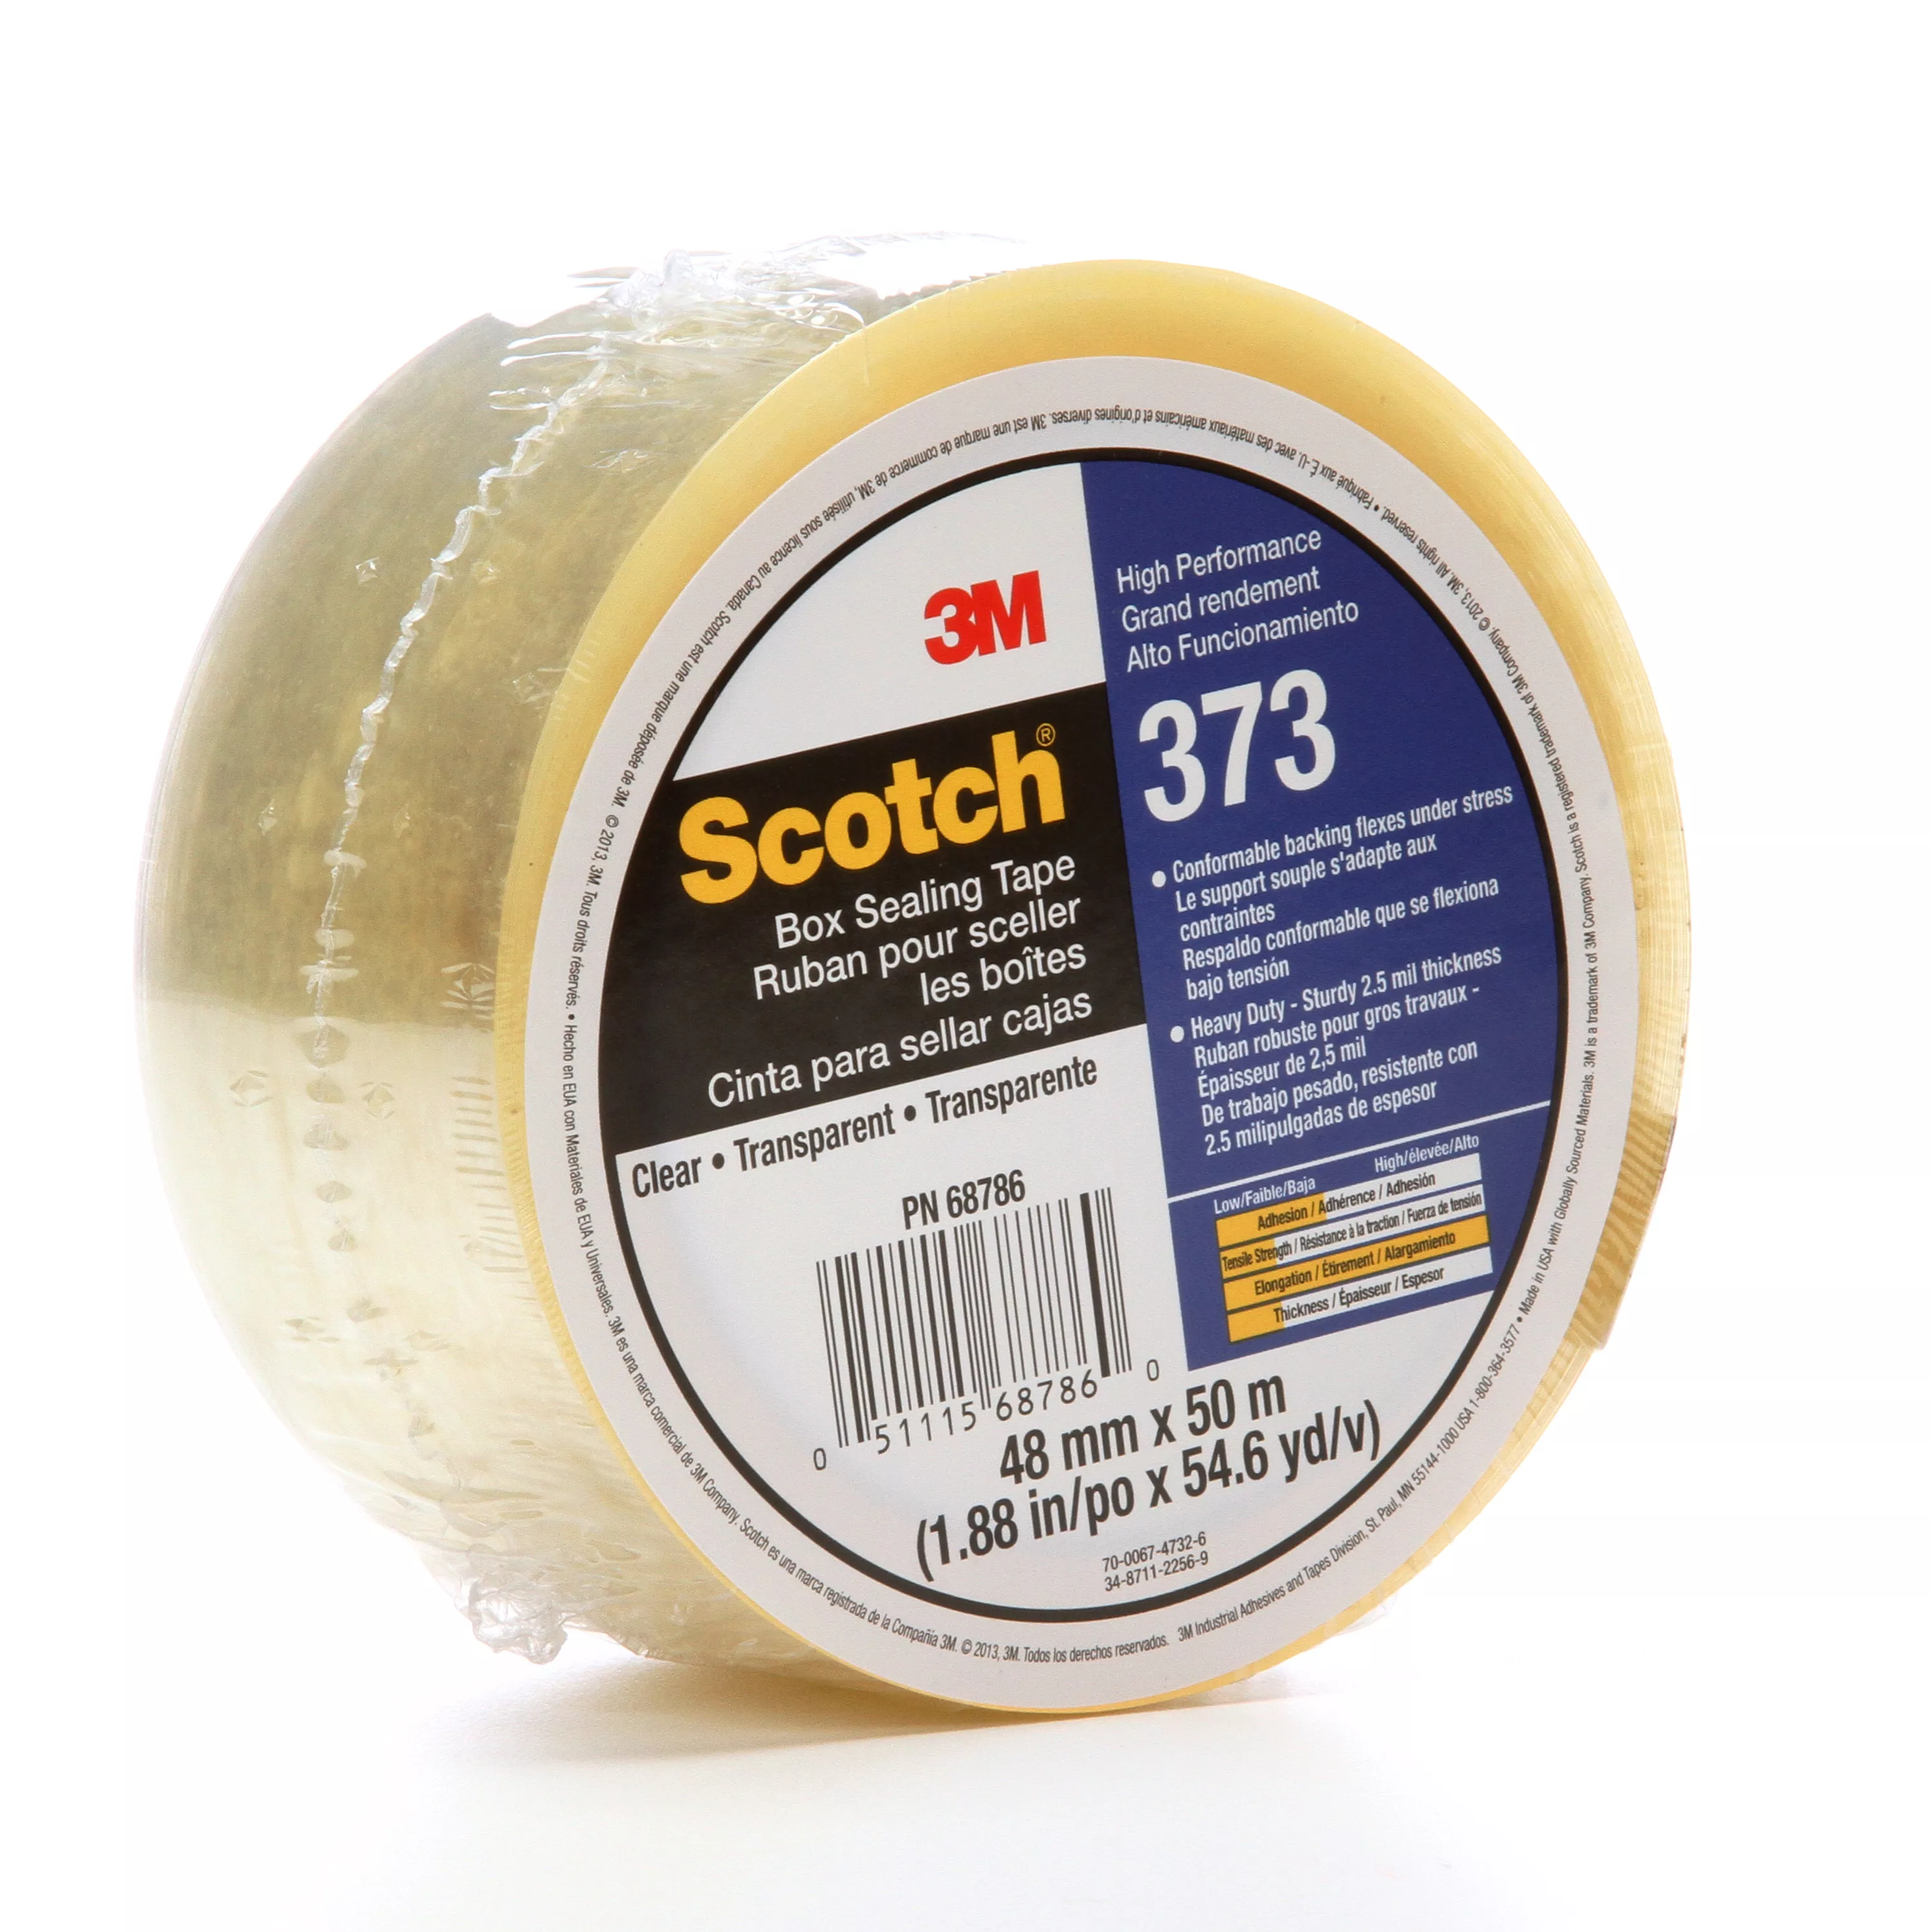 Scotch® Box Sealing Tape 373, Clear, 48 mm x 50 m, 36/Case, Individually
Wrapped Conveniently Packaged